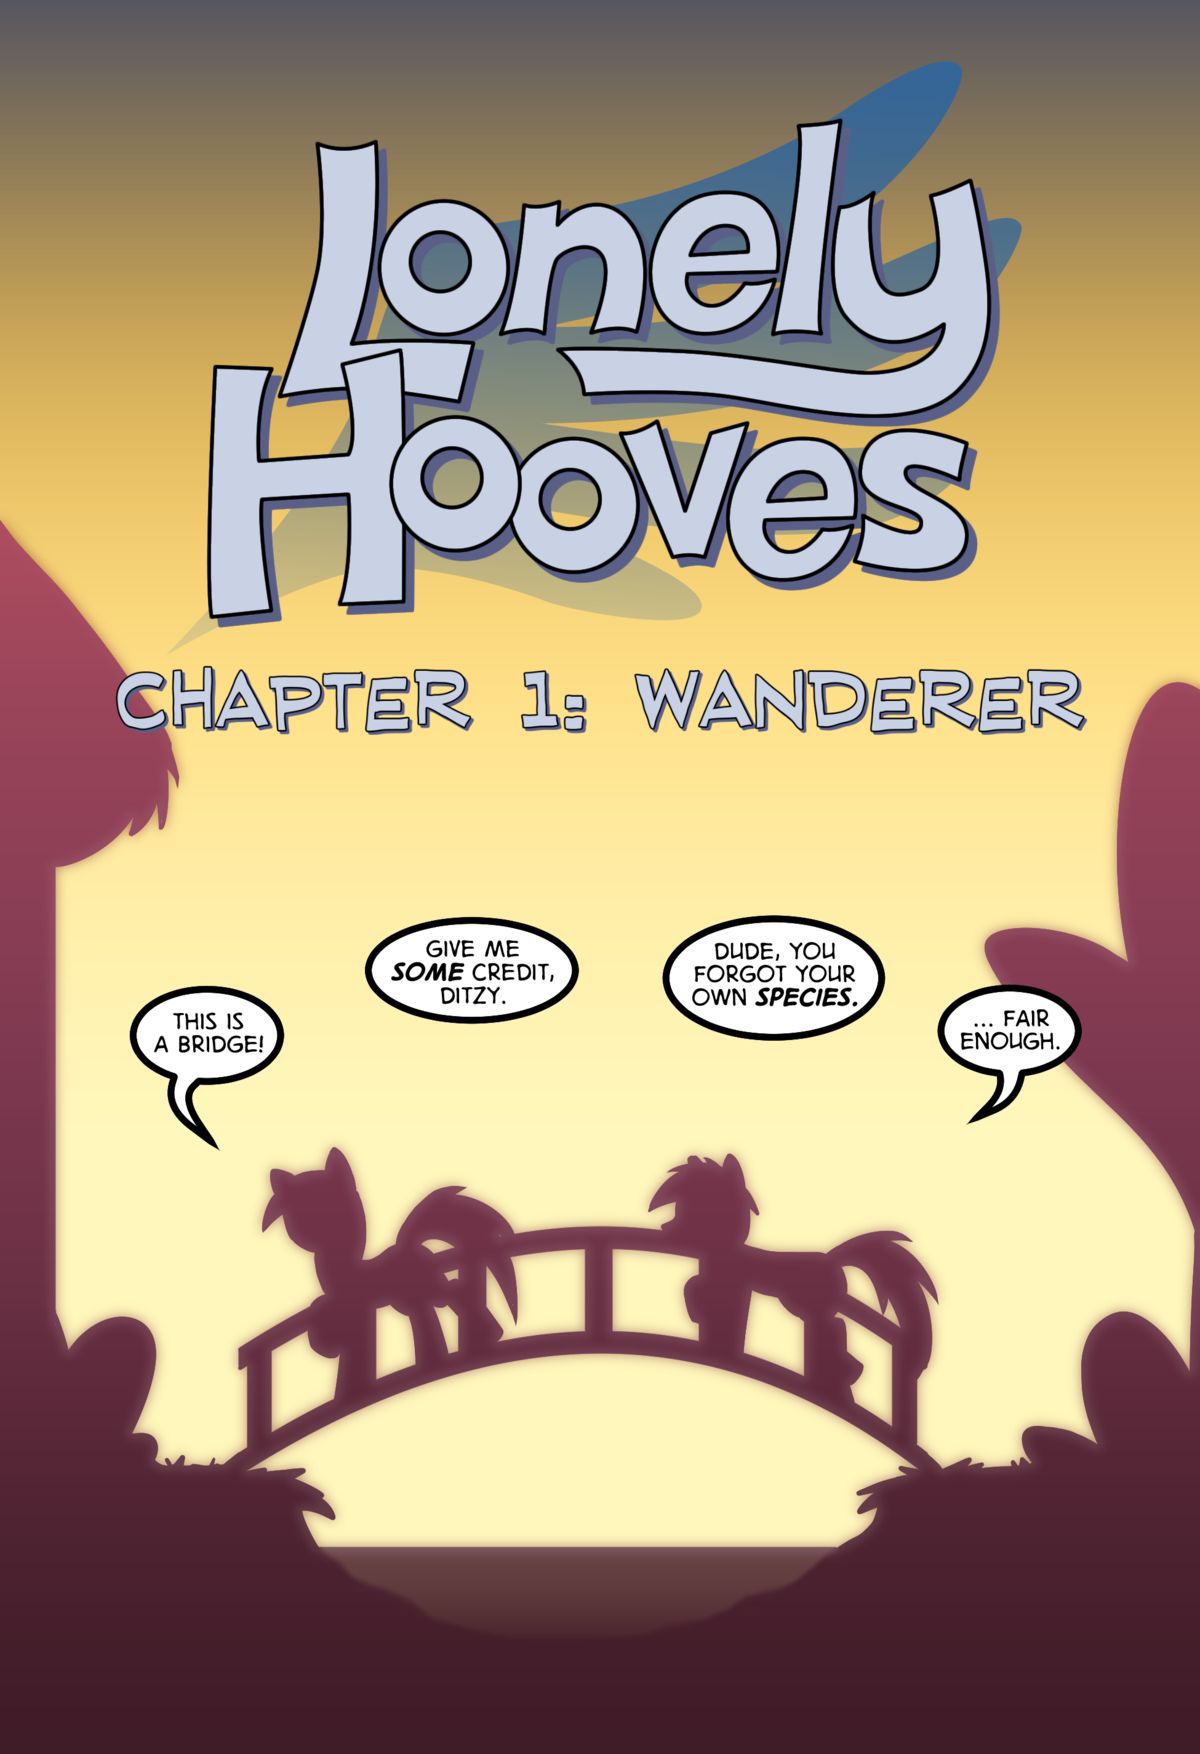 [Zaron] Lonely Hooves (My Little Pony: Friendship is Magic) [English] [Ongoing] 11